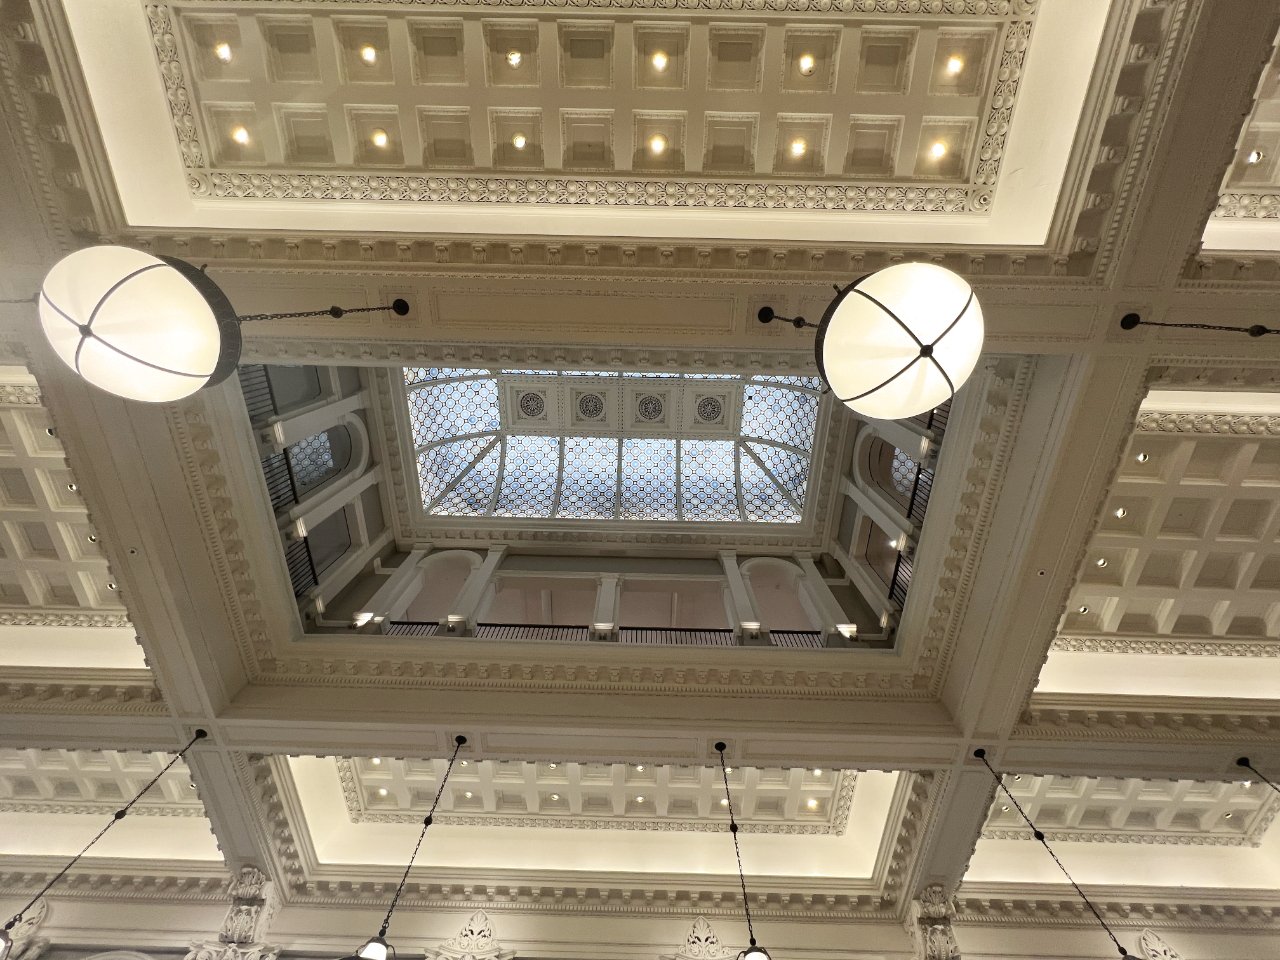 You might see this original skylight when it was a bookstore, but Apple has made it more of a feature